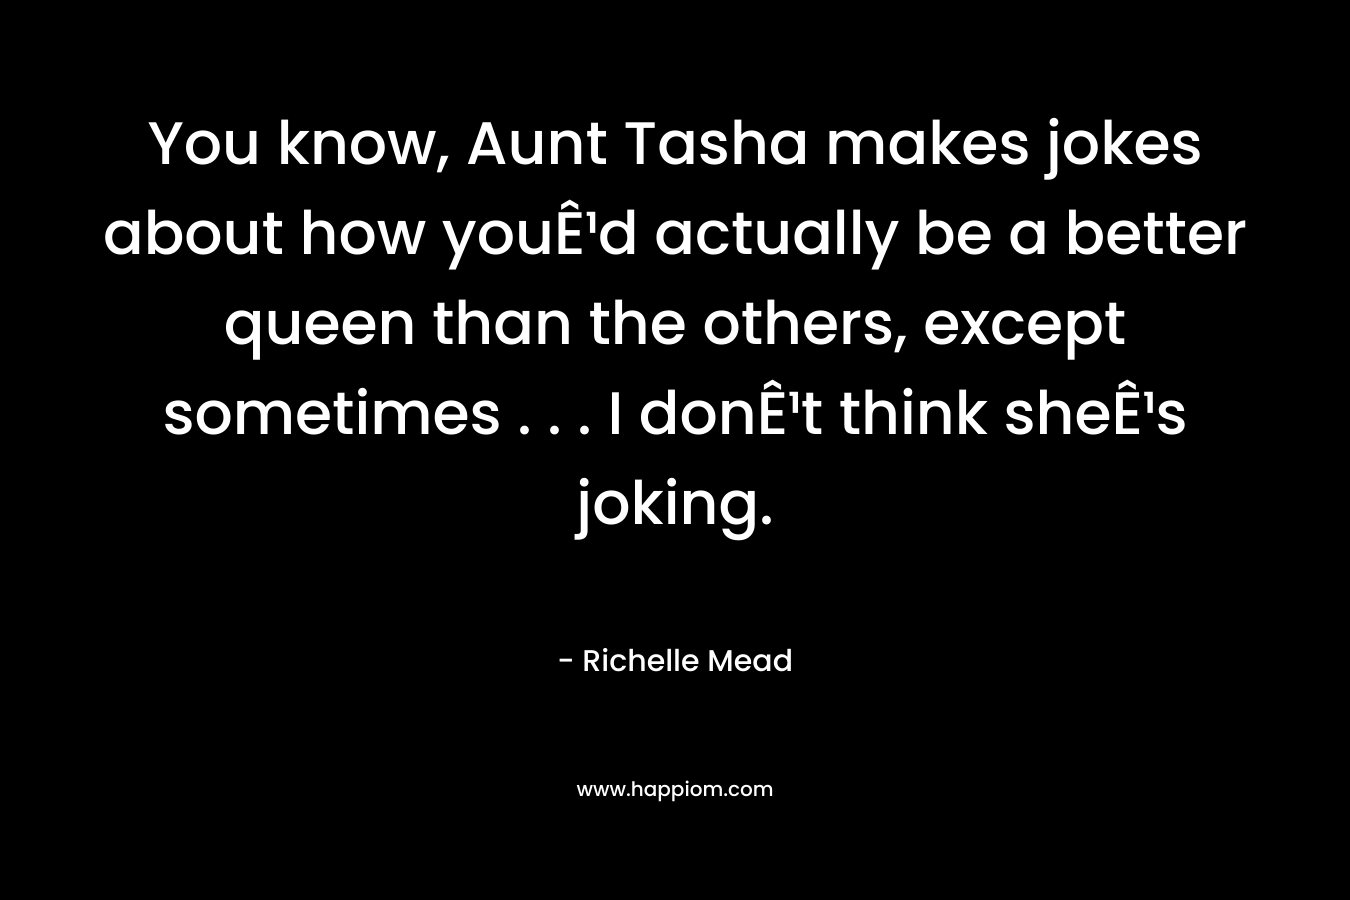 You know, Aunt Tasha makes jokes about how youÊ¹d actually be a better queen than the others, except sometimes . . . I donÊ¹t think sheÊ¹s joking.